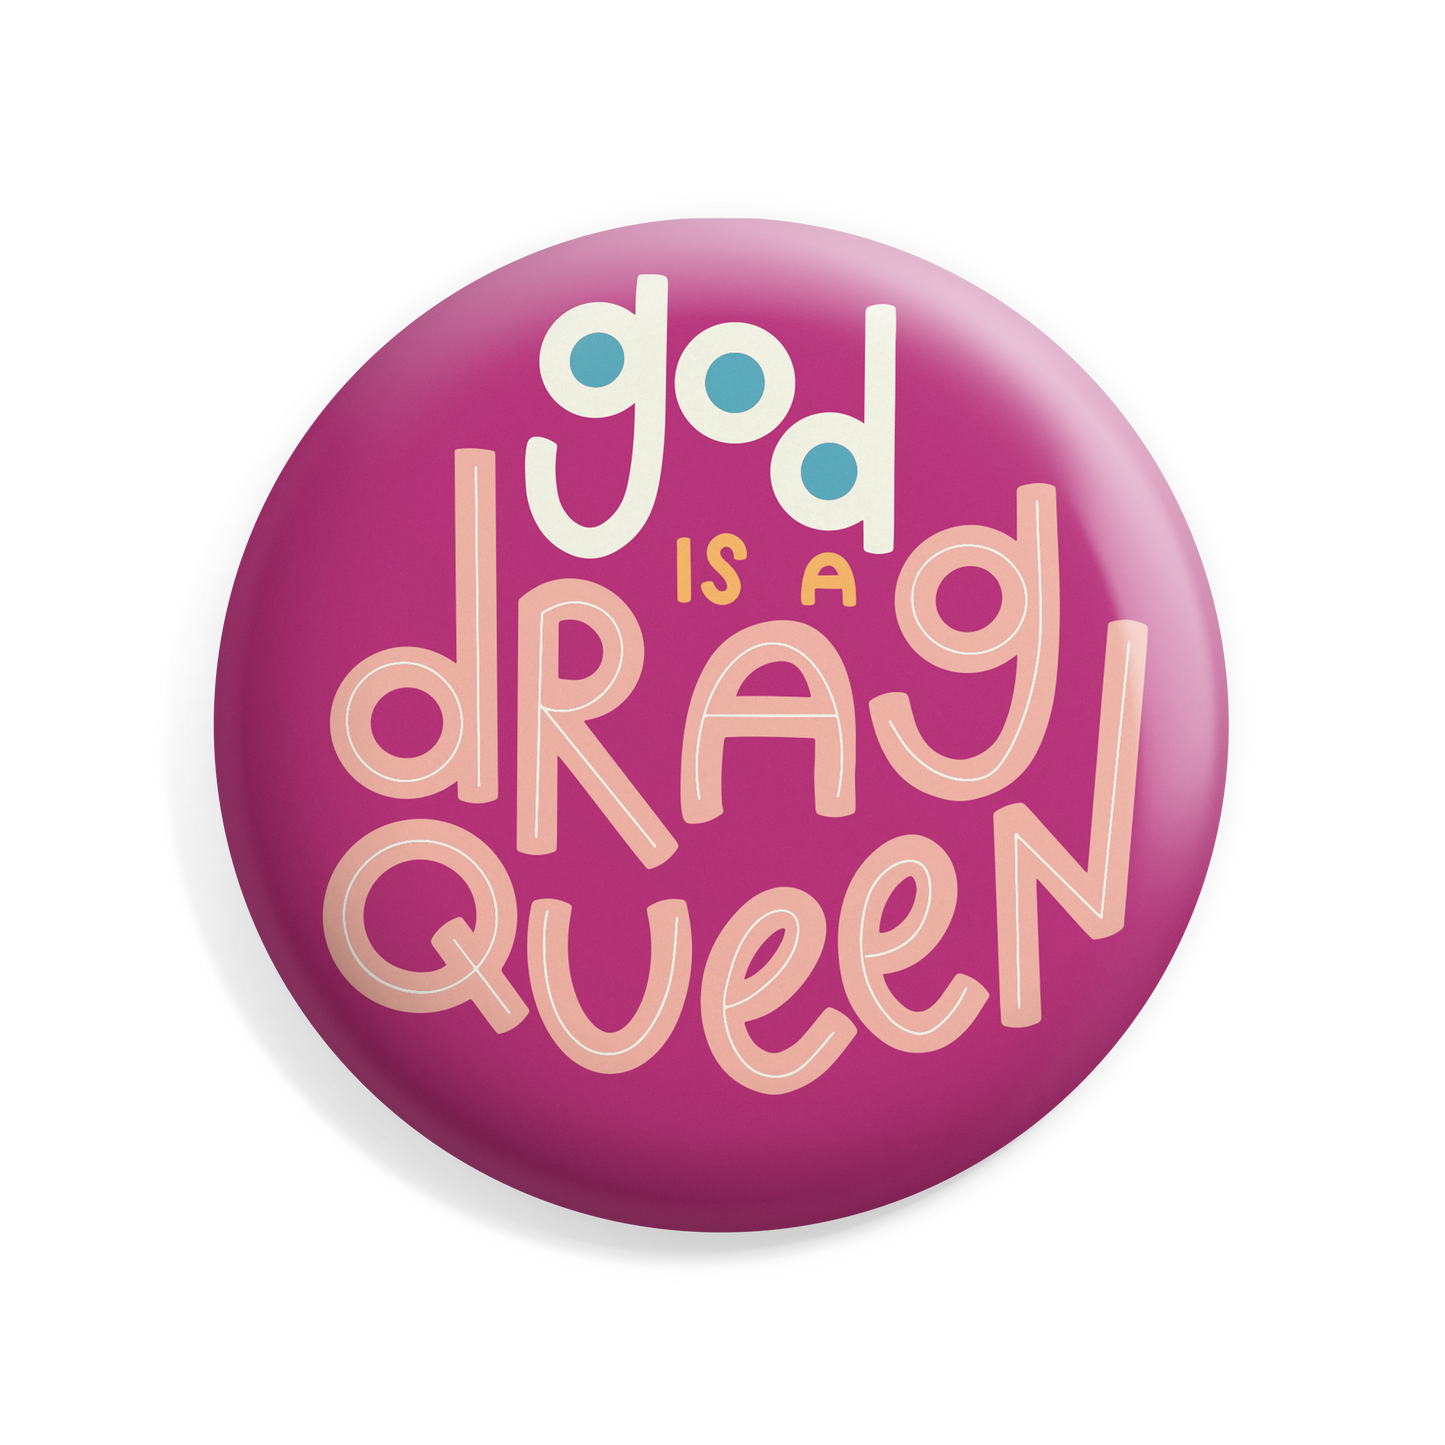 God is a Drag Queen Button